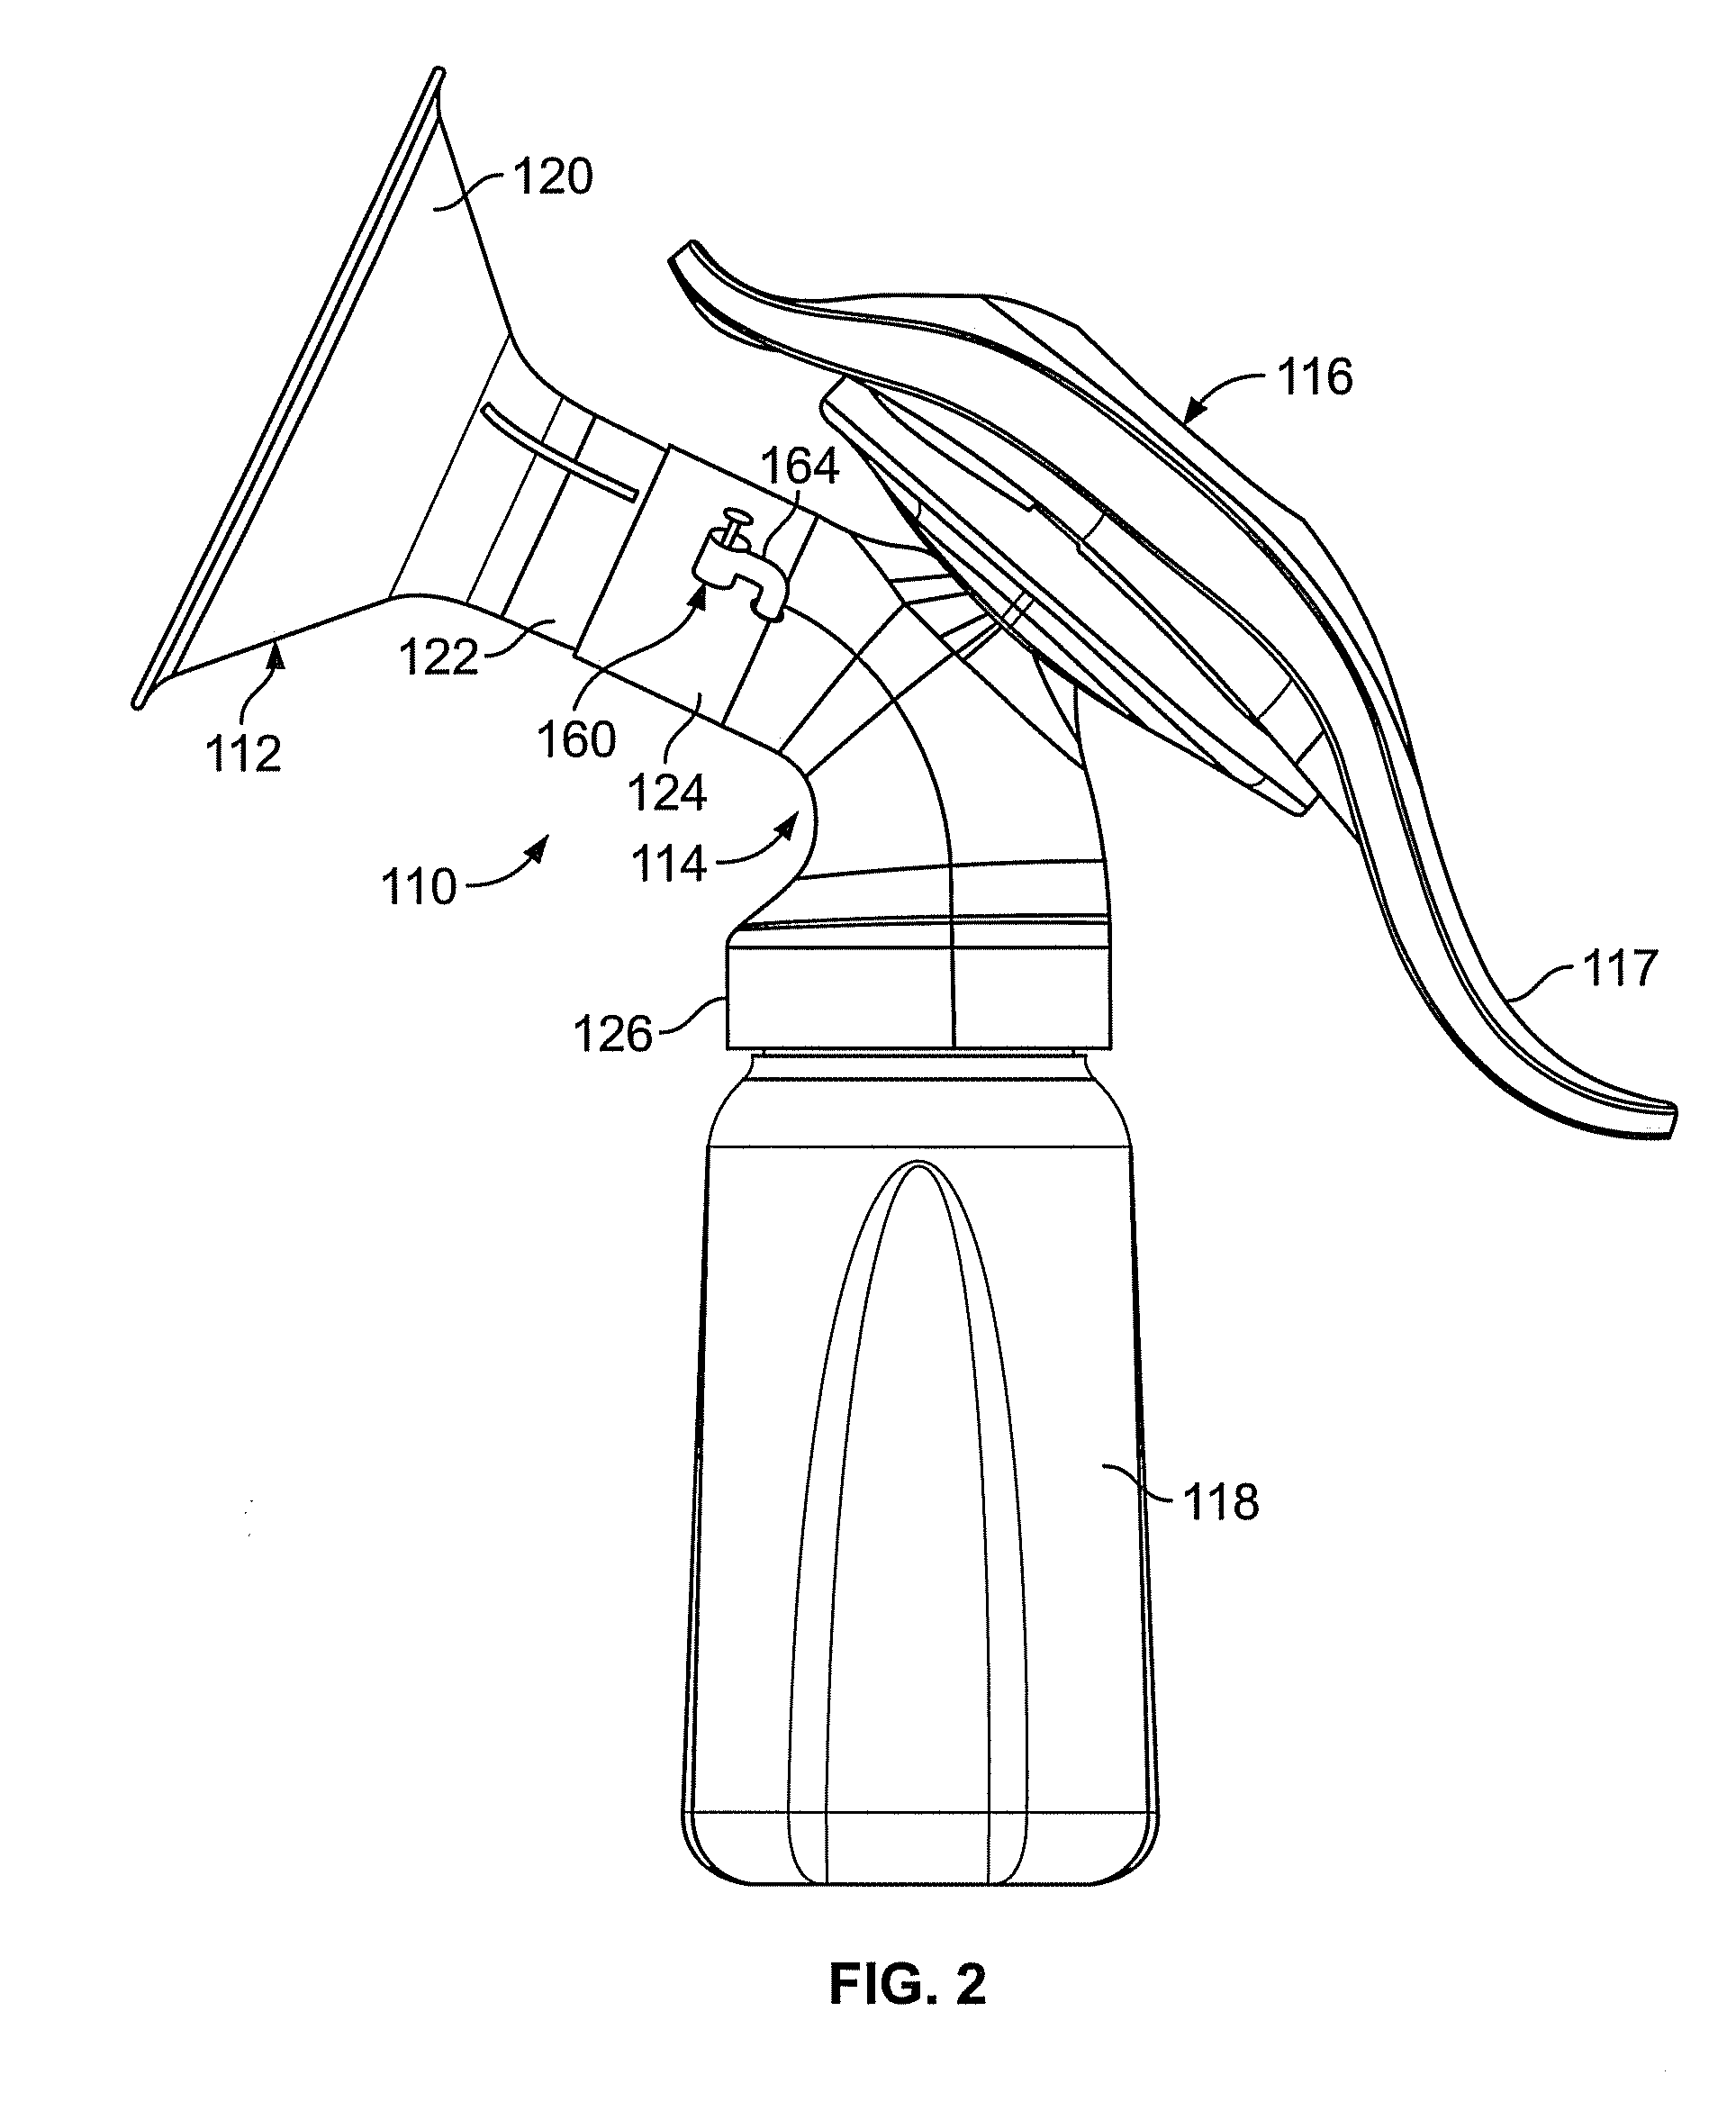 Method and Apparatus for Minimum Negative Pressure Control, Particularly for a Breastpump with Breastshield Pressure Control System